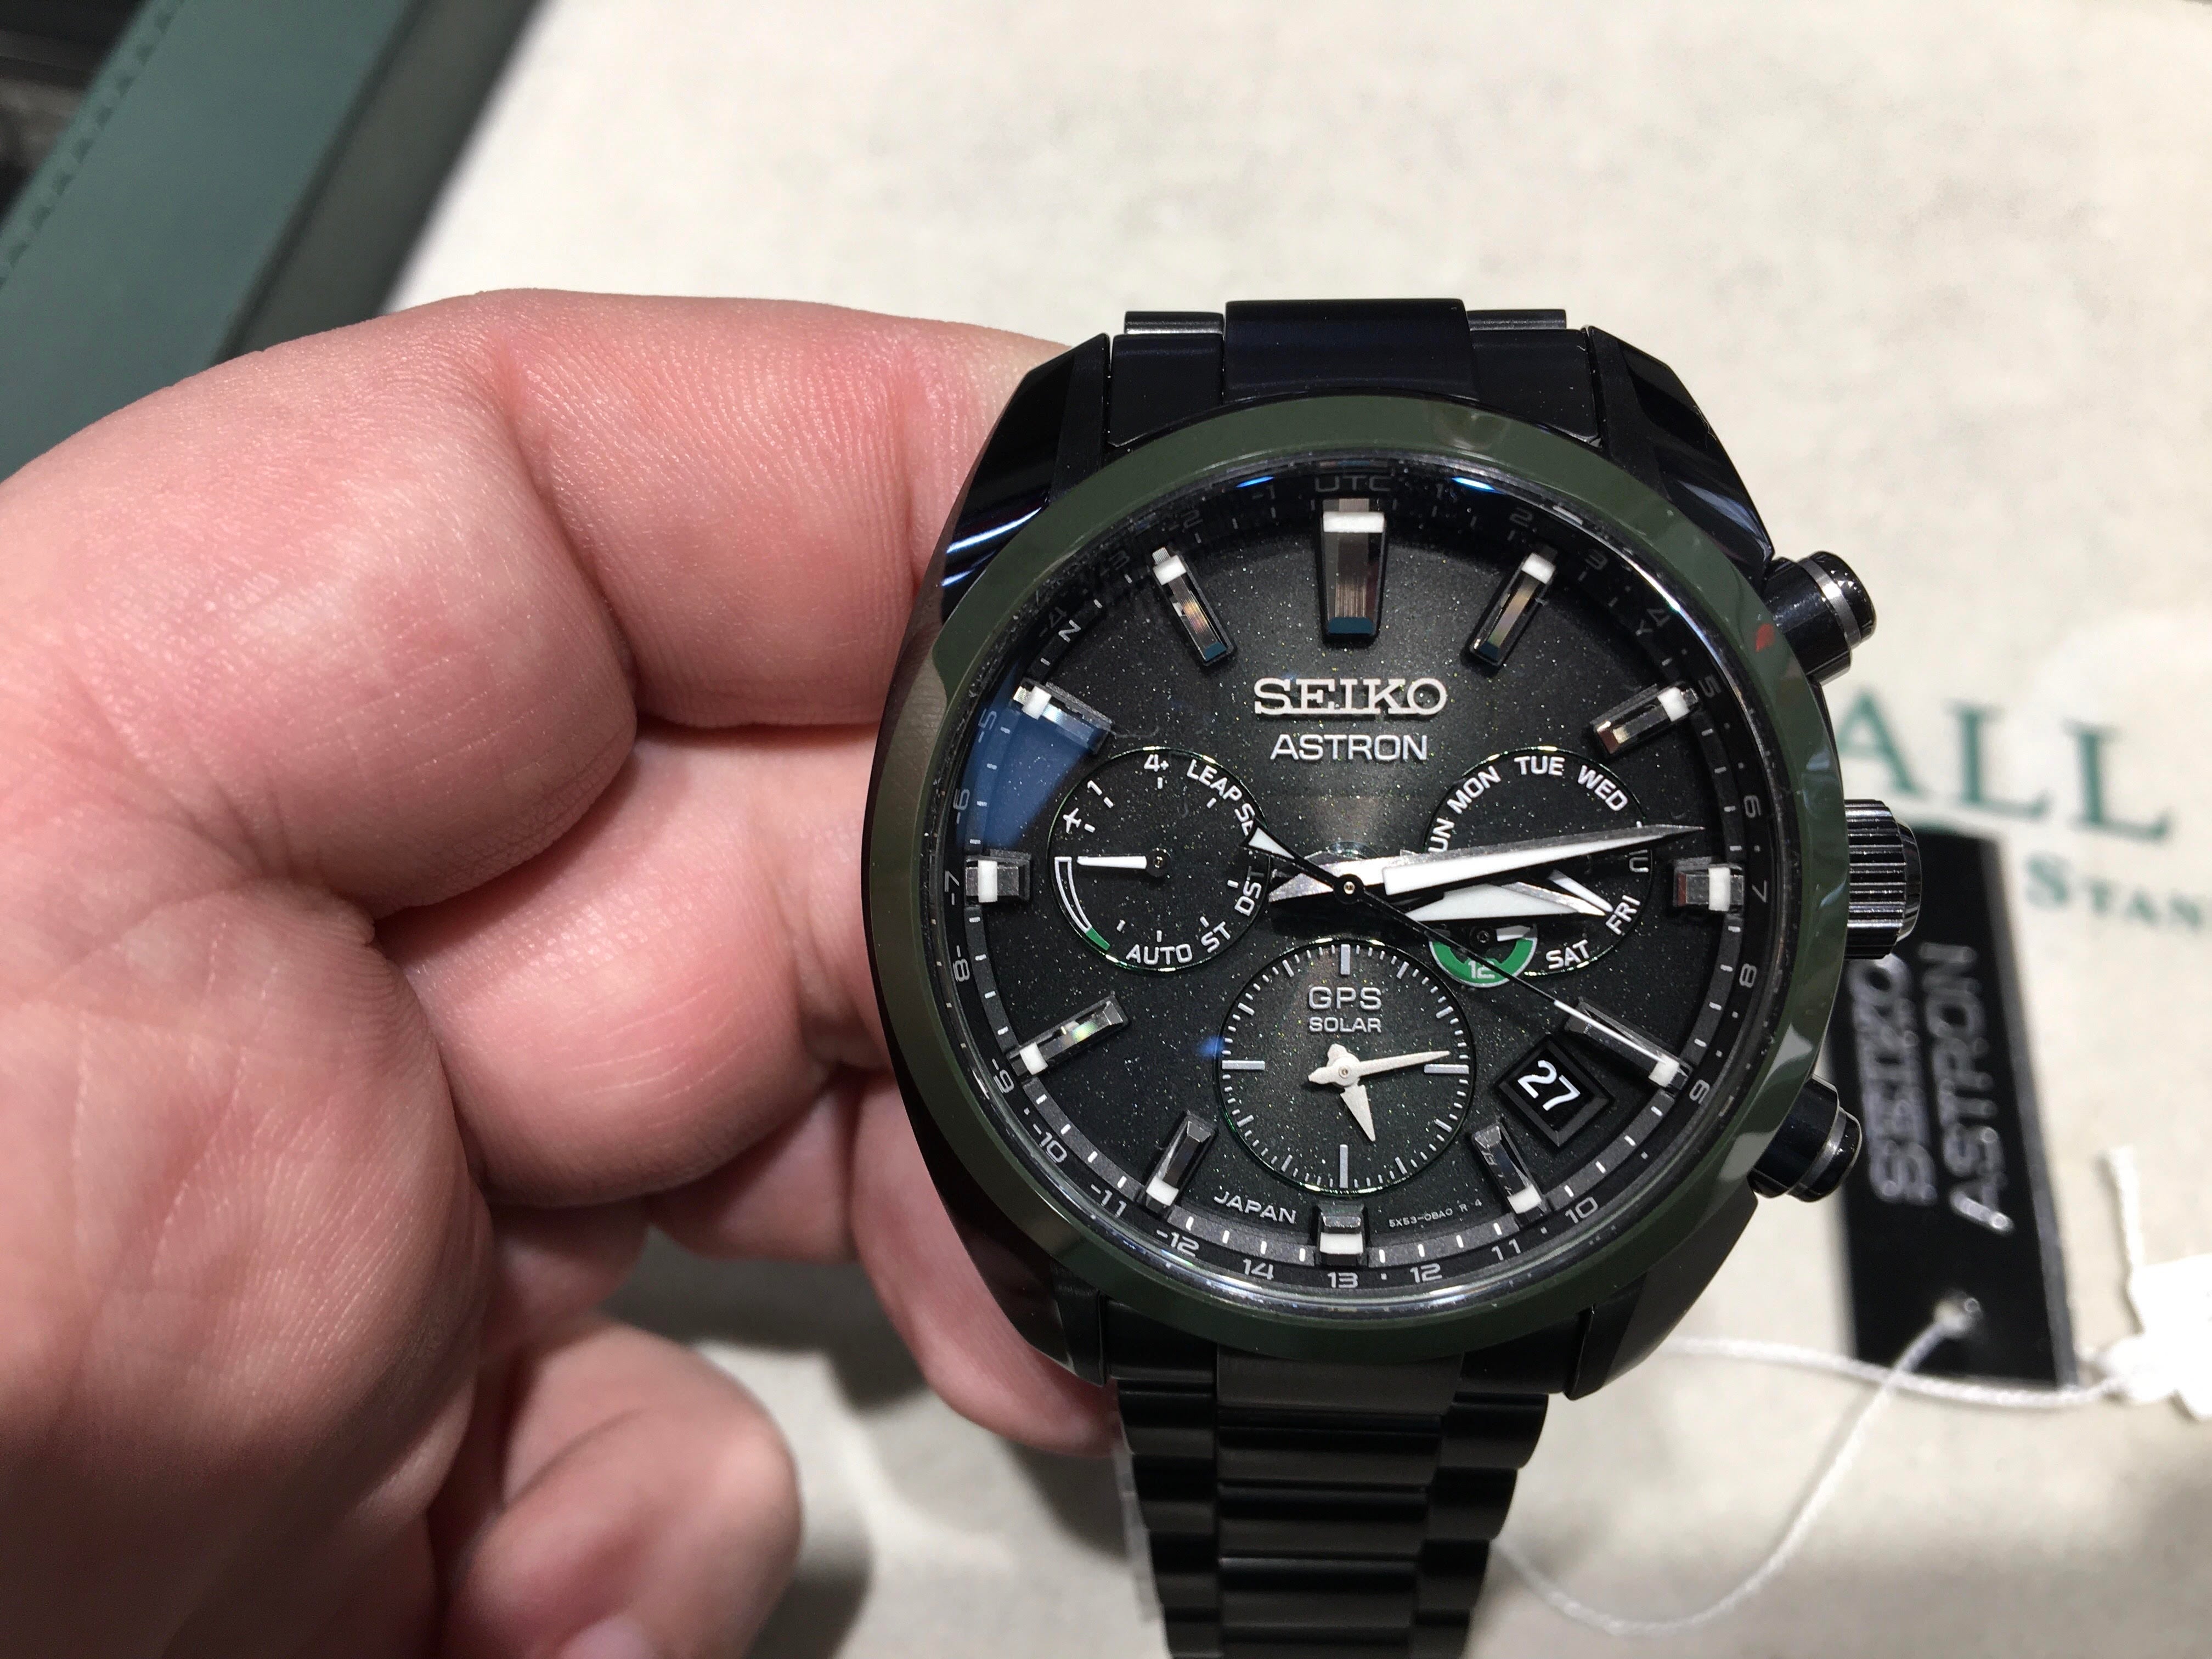 The Latest Astron In The Astron Lineup (Seiko Astron SSH079) | WatchUSeek  Watch Forums